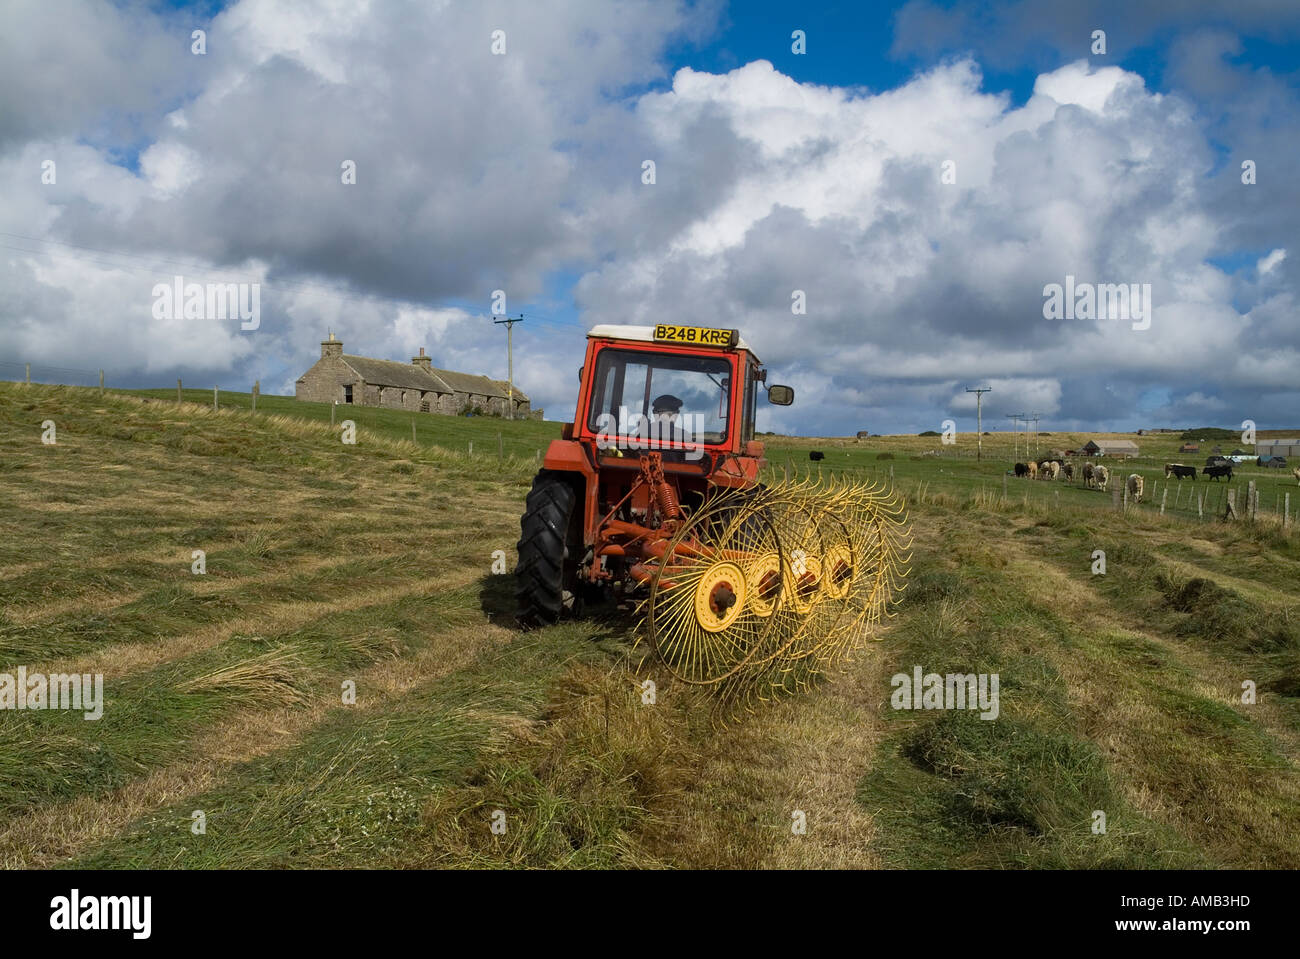 dh  HARVESTING UK Tractor spreading silage to dry grass for harvesting and cottage Orkney Stock Photo